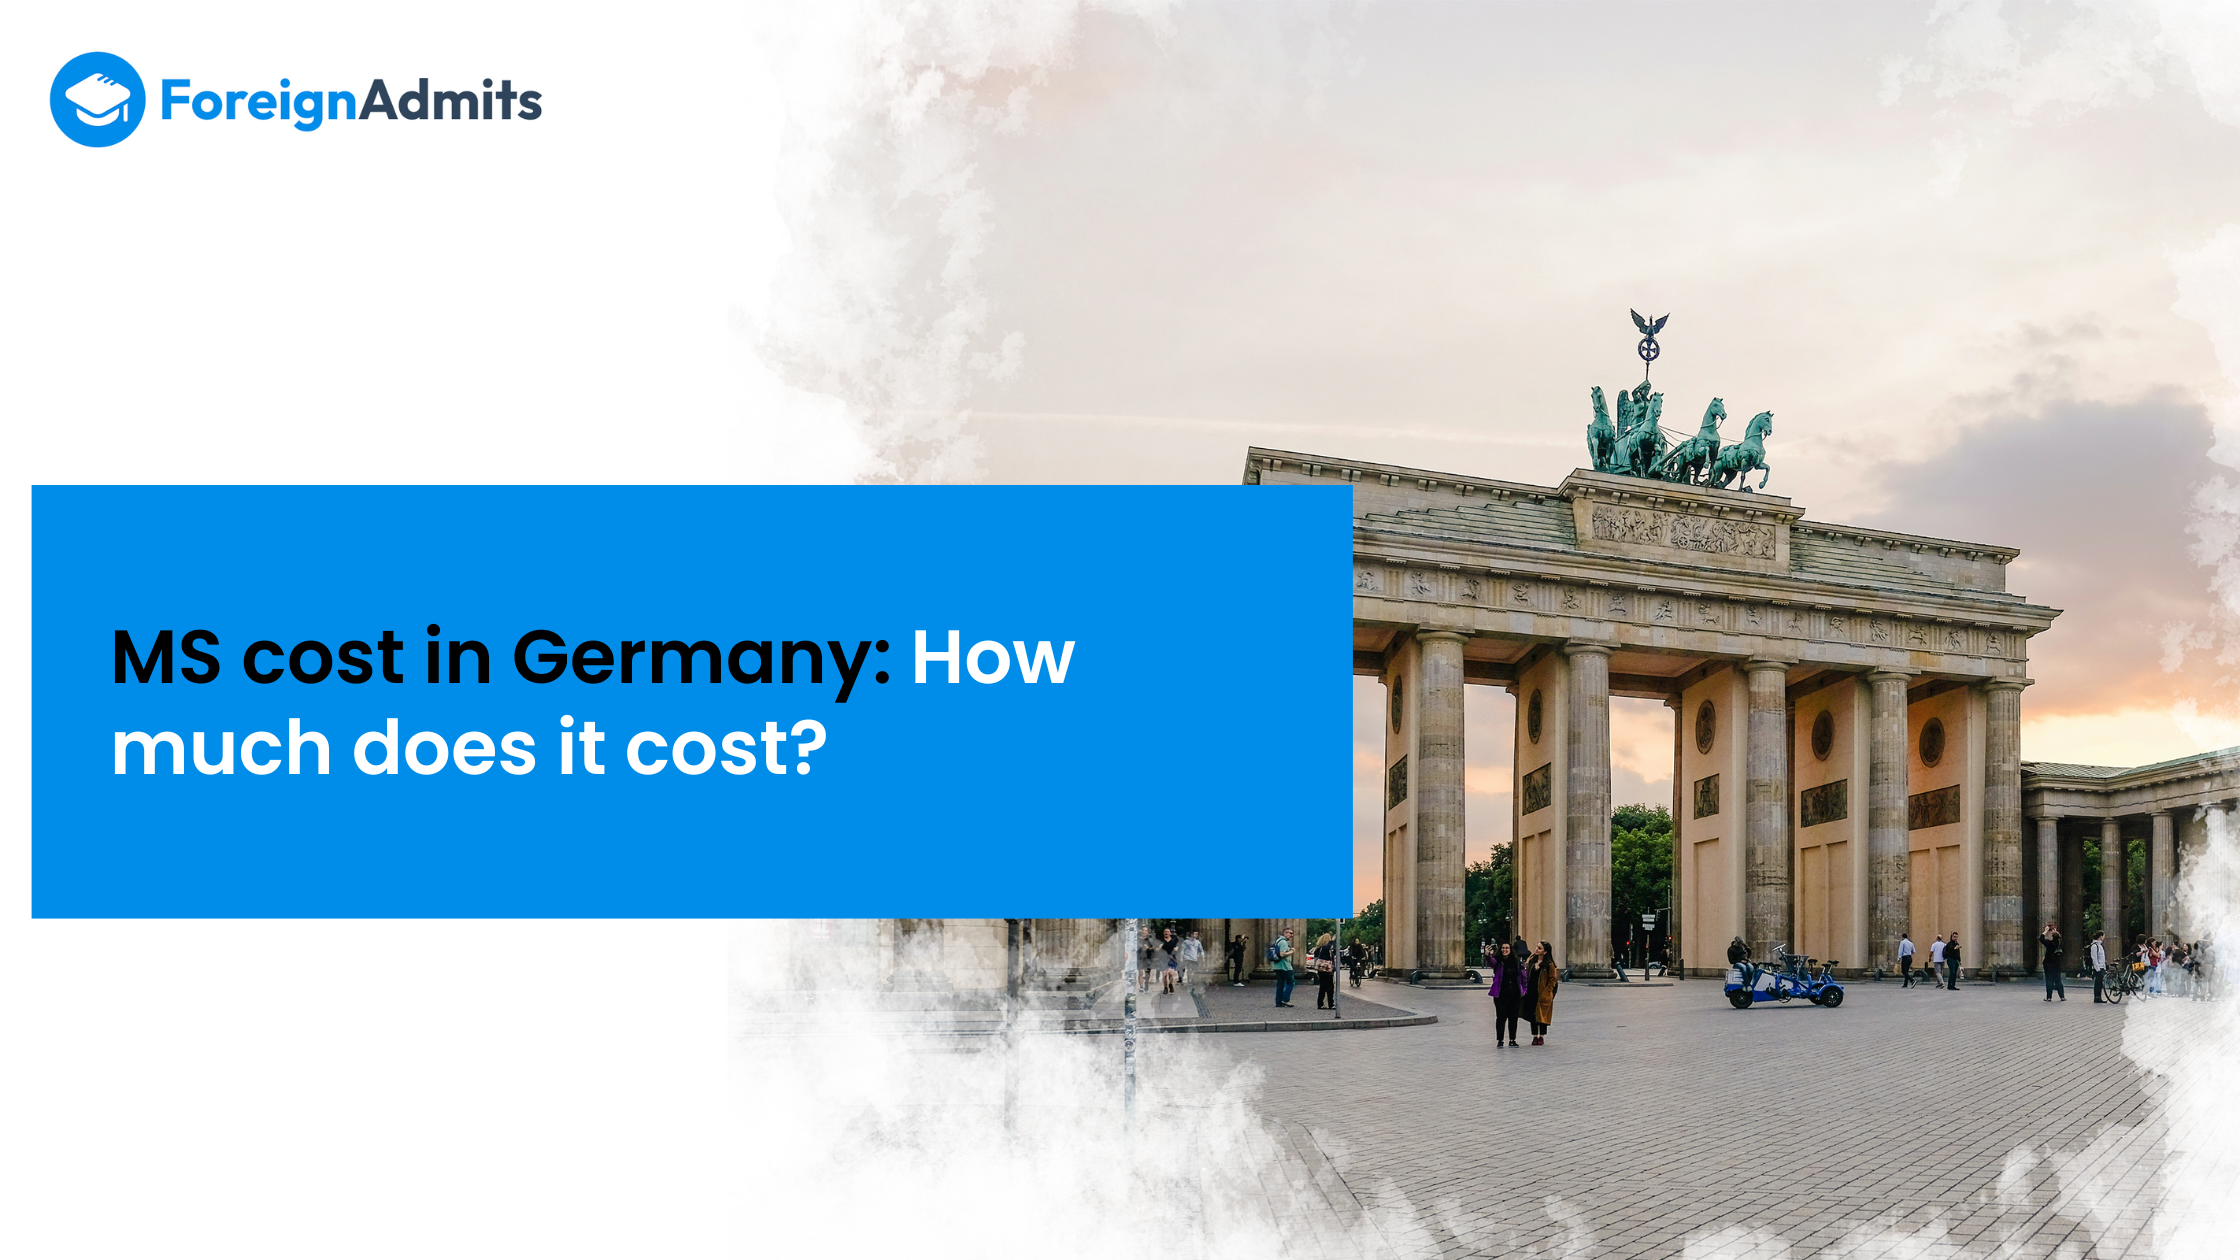 MS cost in Germany: How much does it cost?